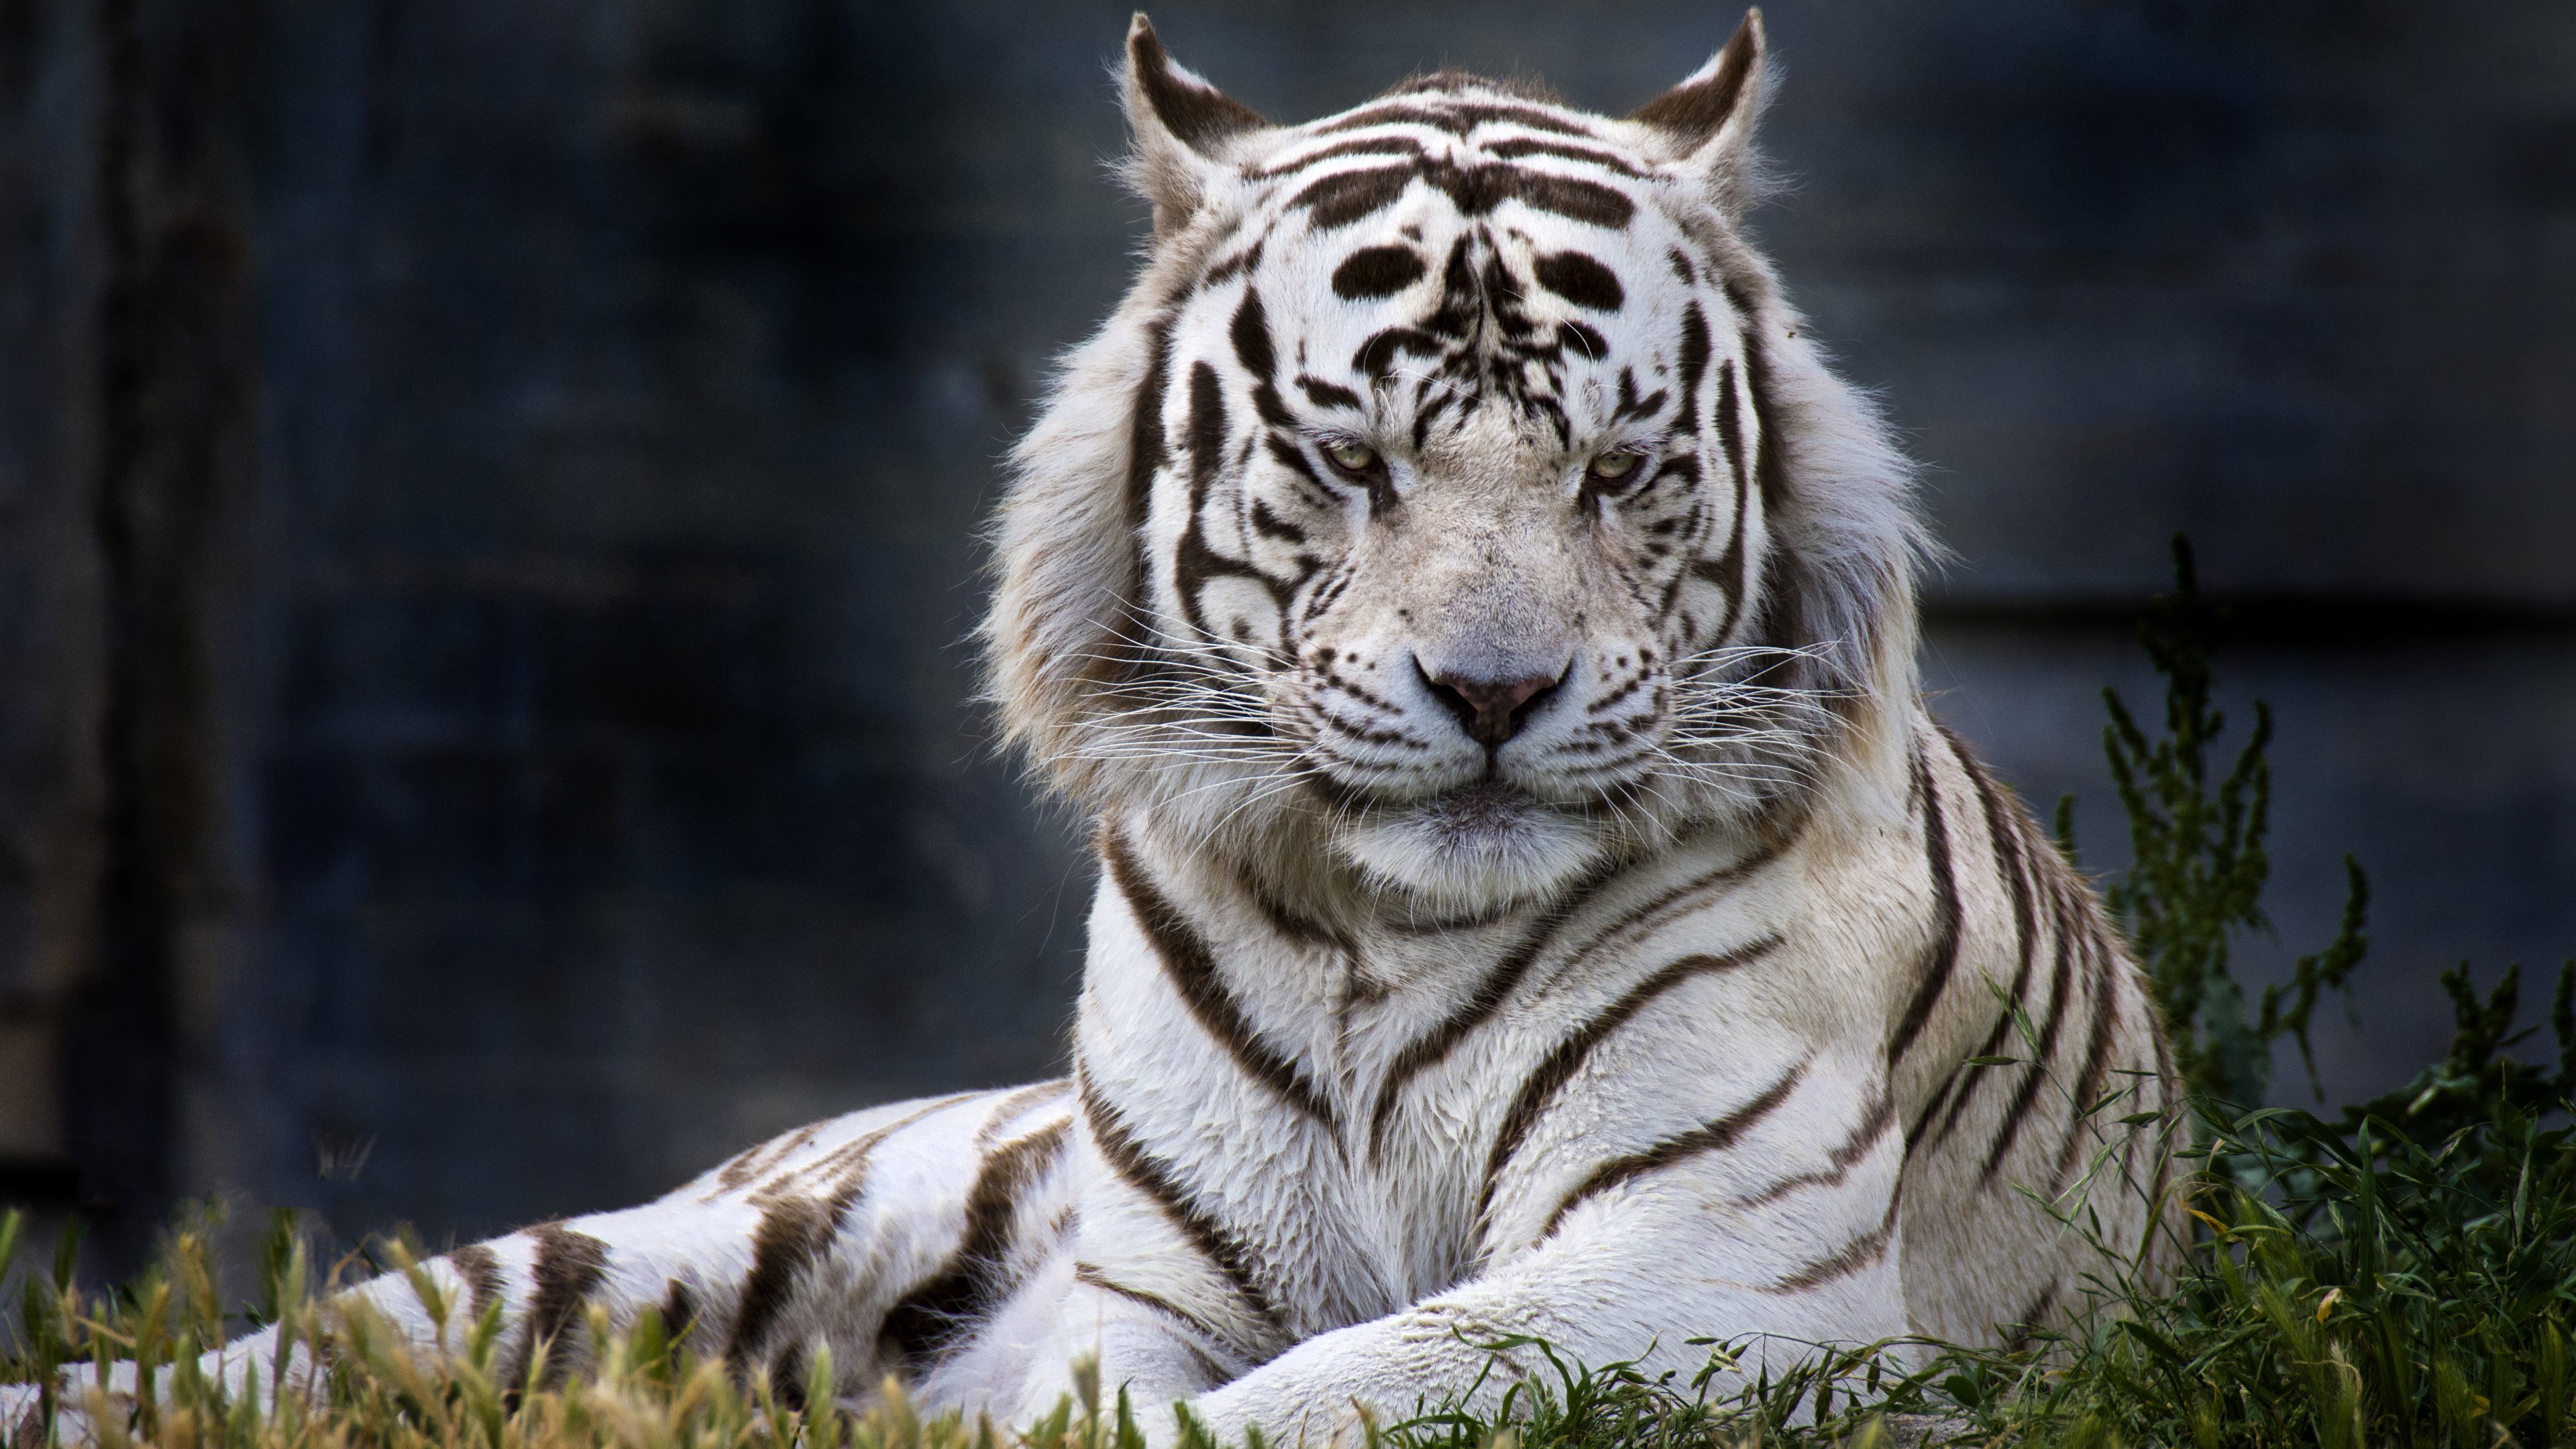 White Tiger at Madrid Zoo uhd wallpapers - Ultra High Definition ...